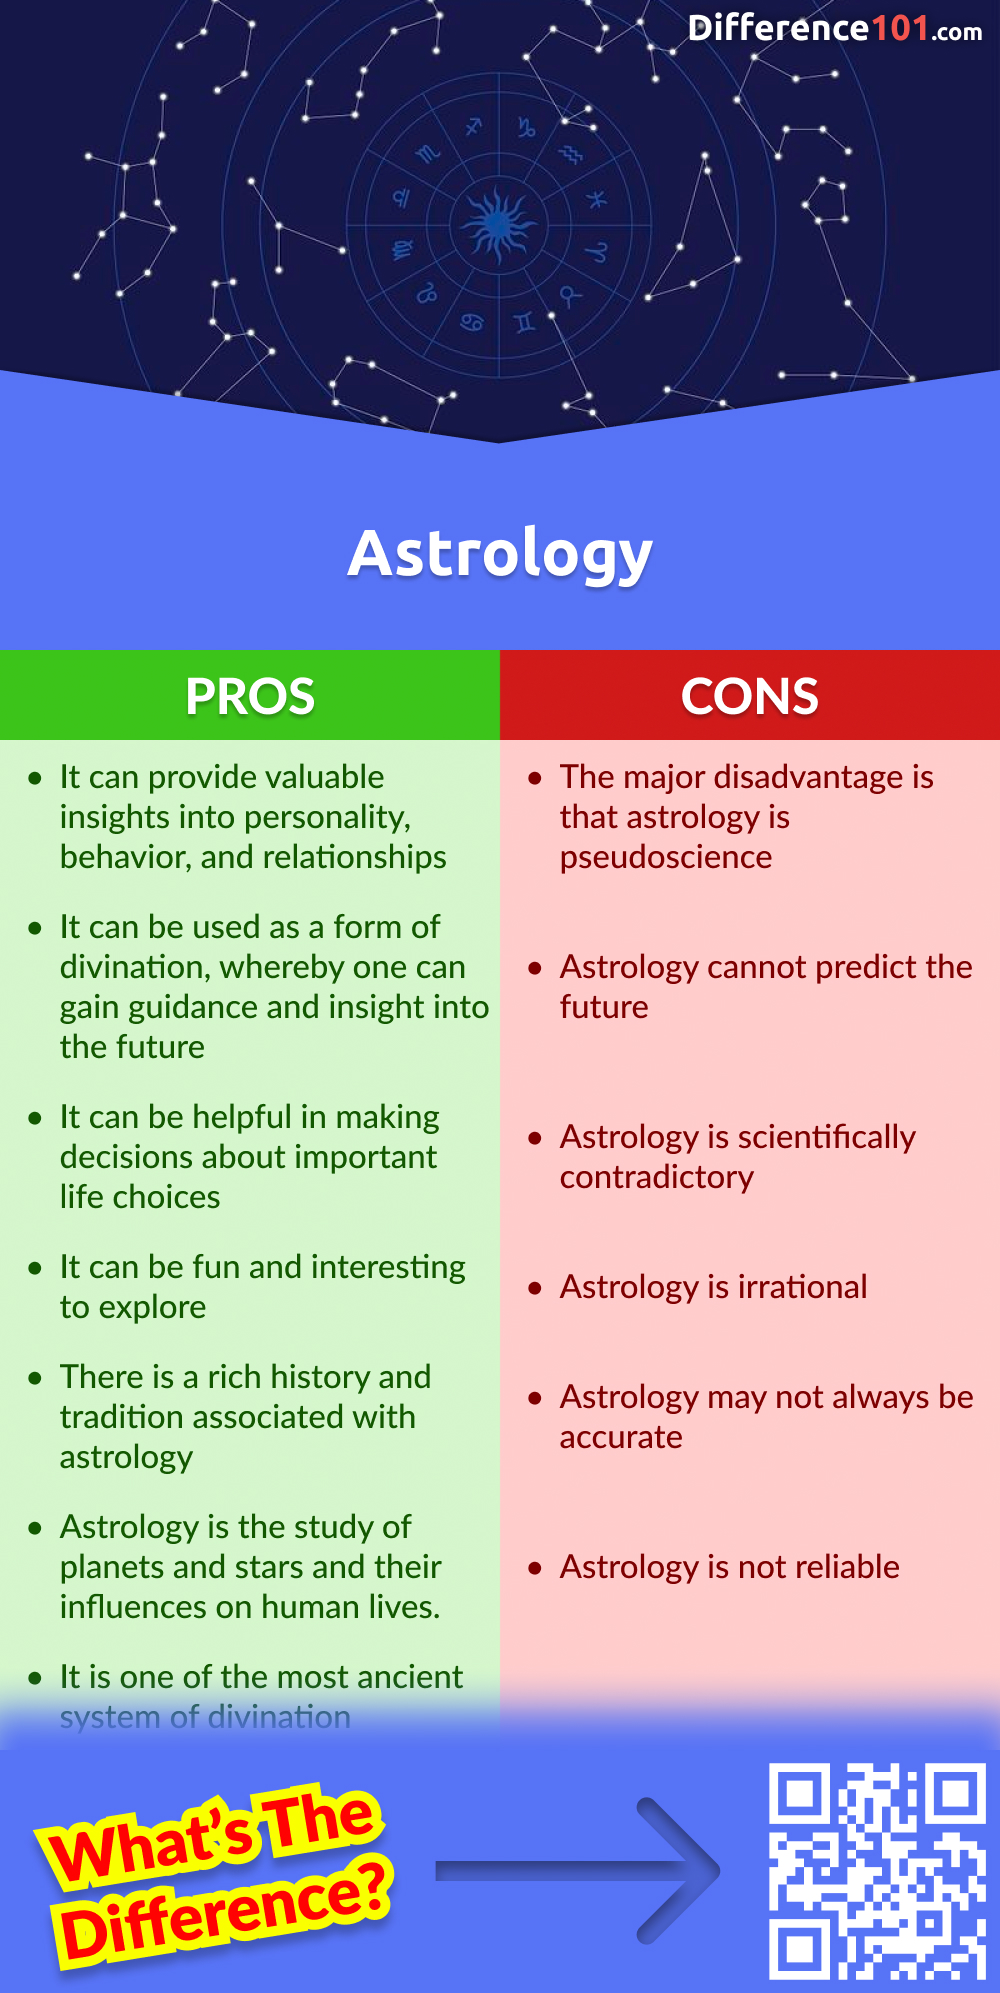 Astrology Pros & Cons